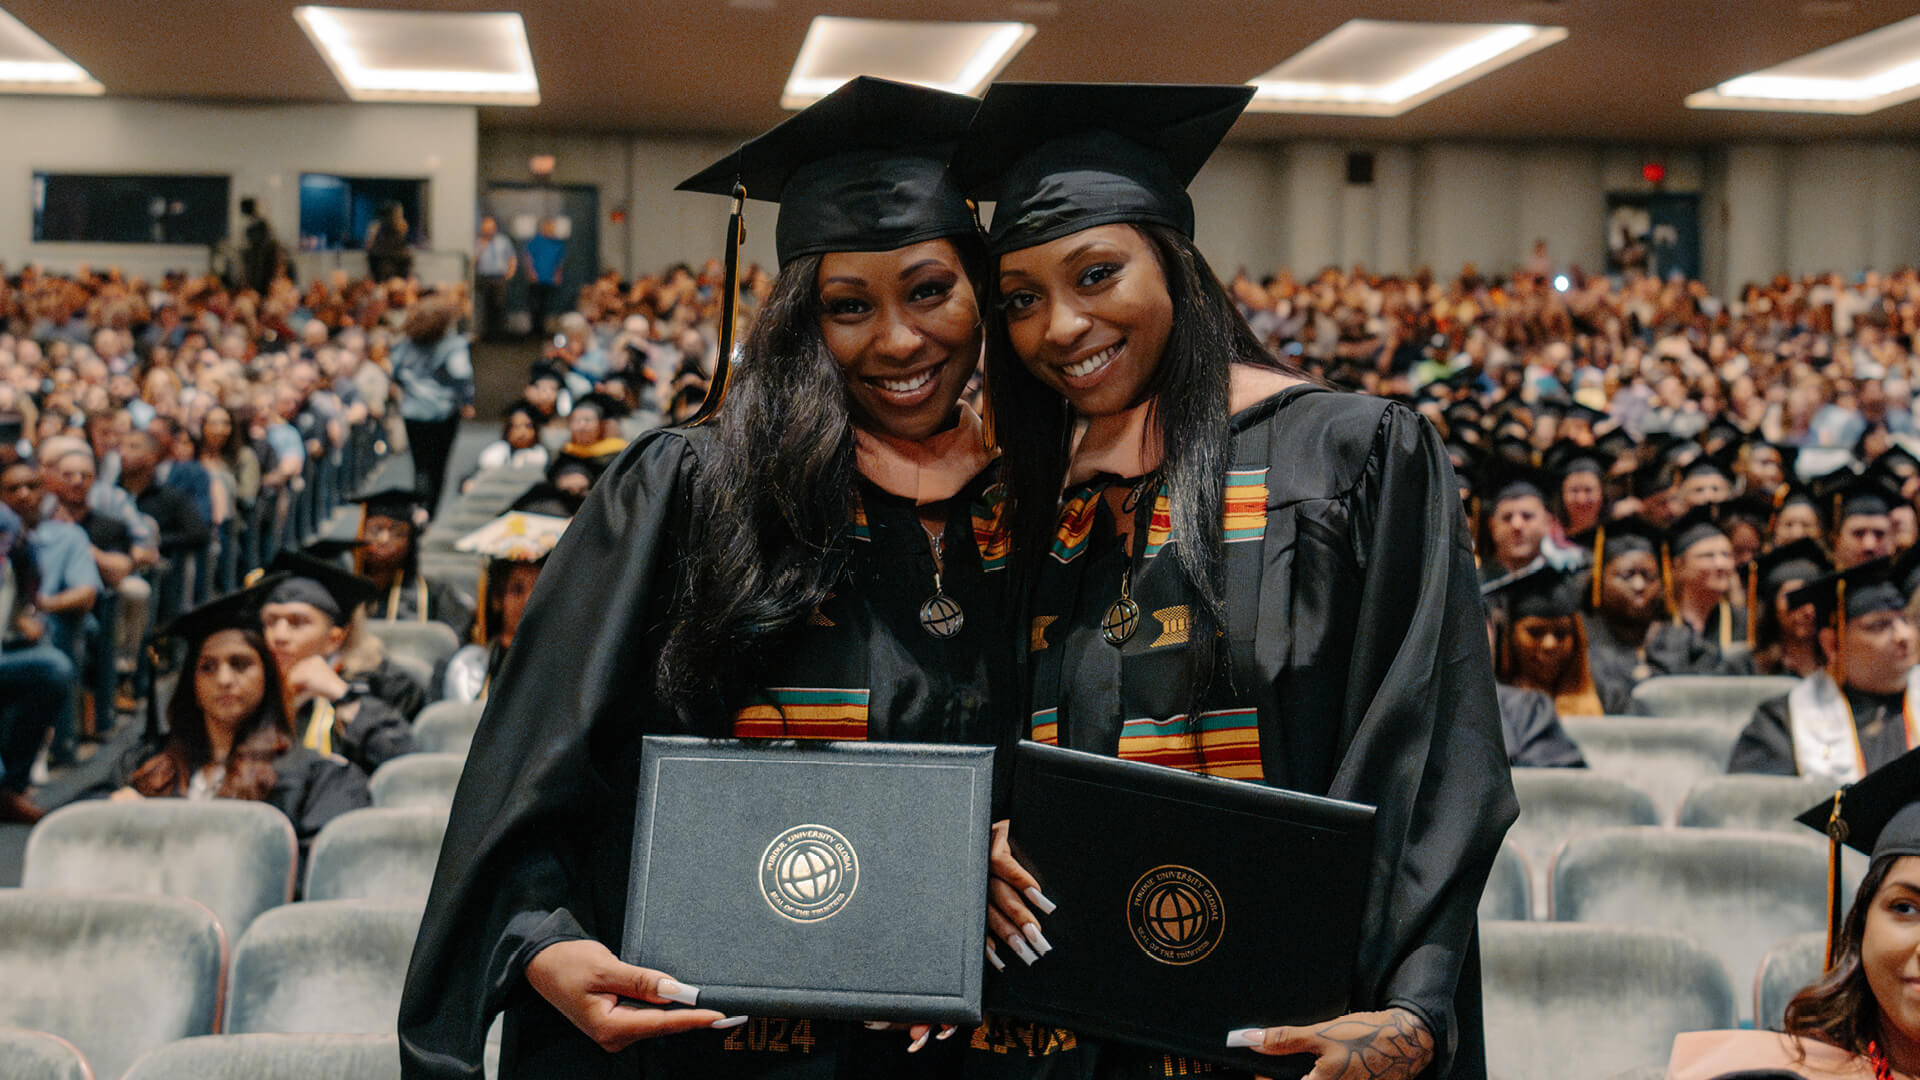 Chrishana and Chrishá Jackson stand next to each other, smiling and holding their degrees at graduation.